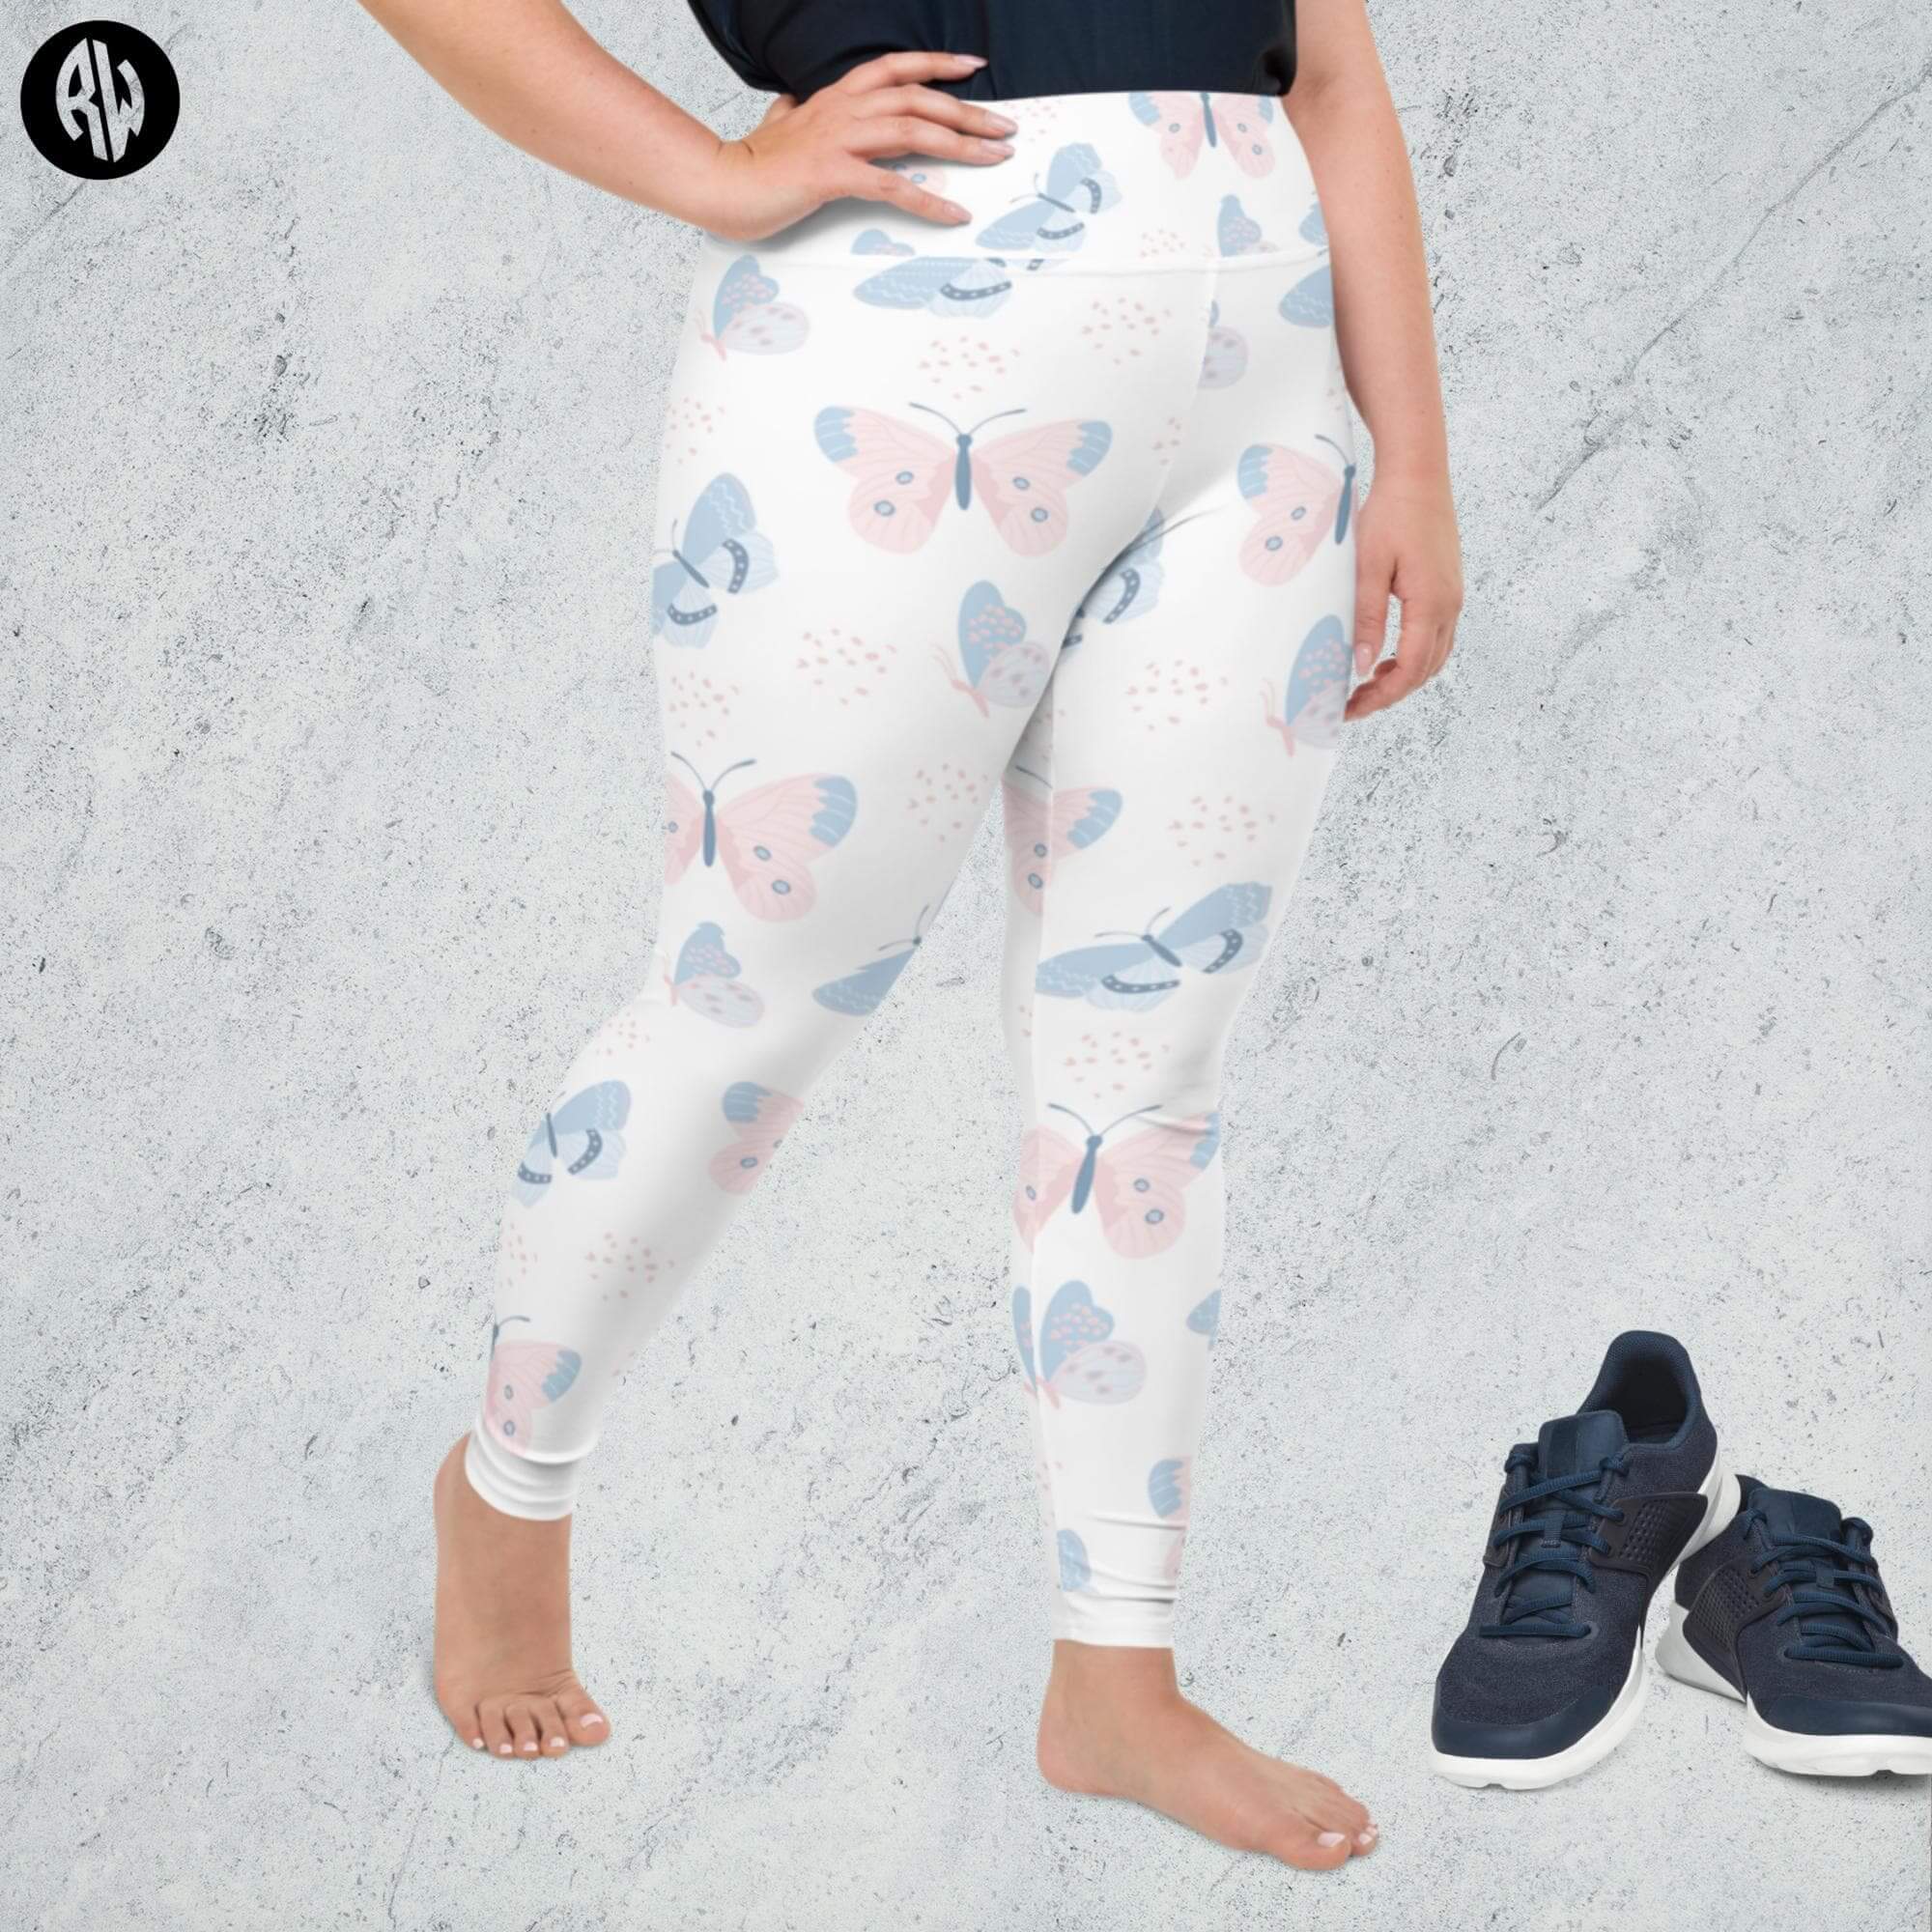 Bliss Plus Size Leggings Australia - Revive Wear     Get the perfect fit with our High Waisted Plus Size Leggings. Made from a soft and stretchy fabric, these leggings offer a comfortable and flattering high-waisted design in various sizes.